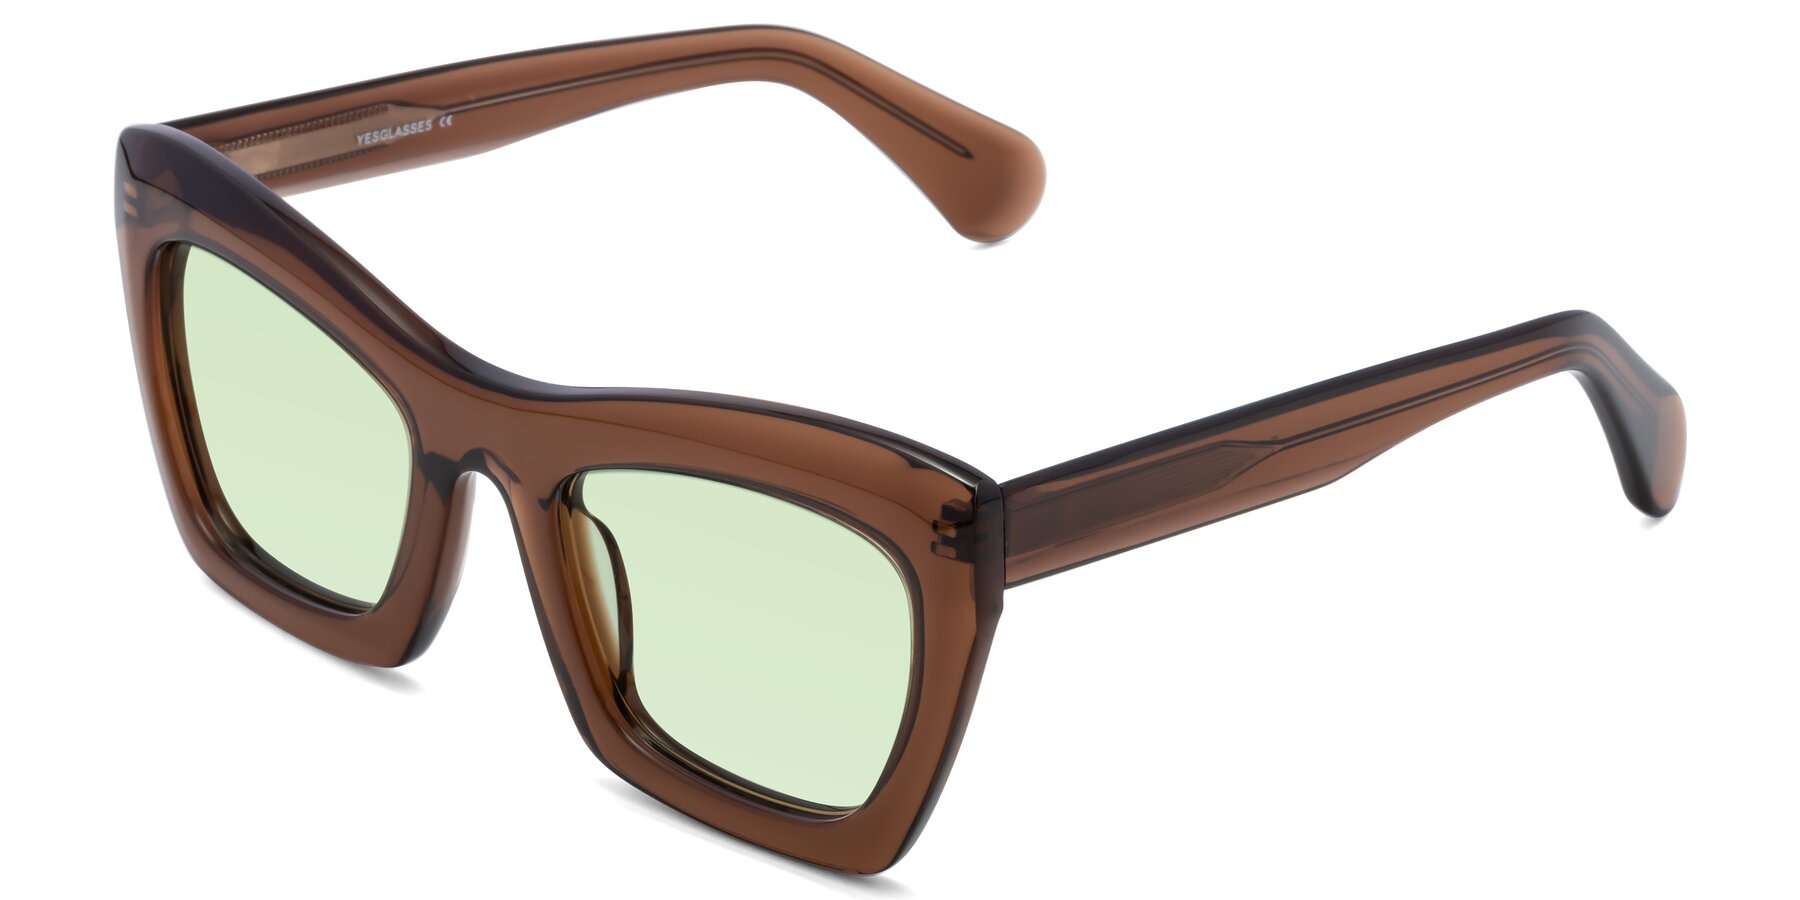 Angle of Randi in Brown with Light Green Tinted Lenses